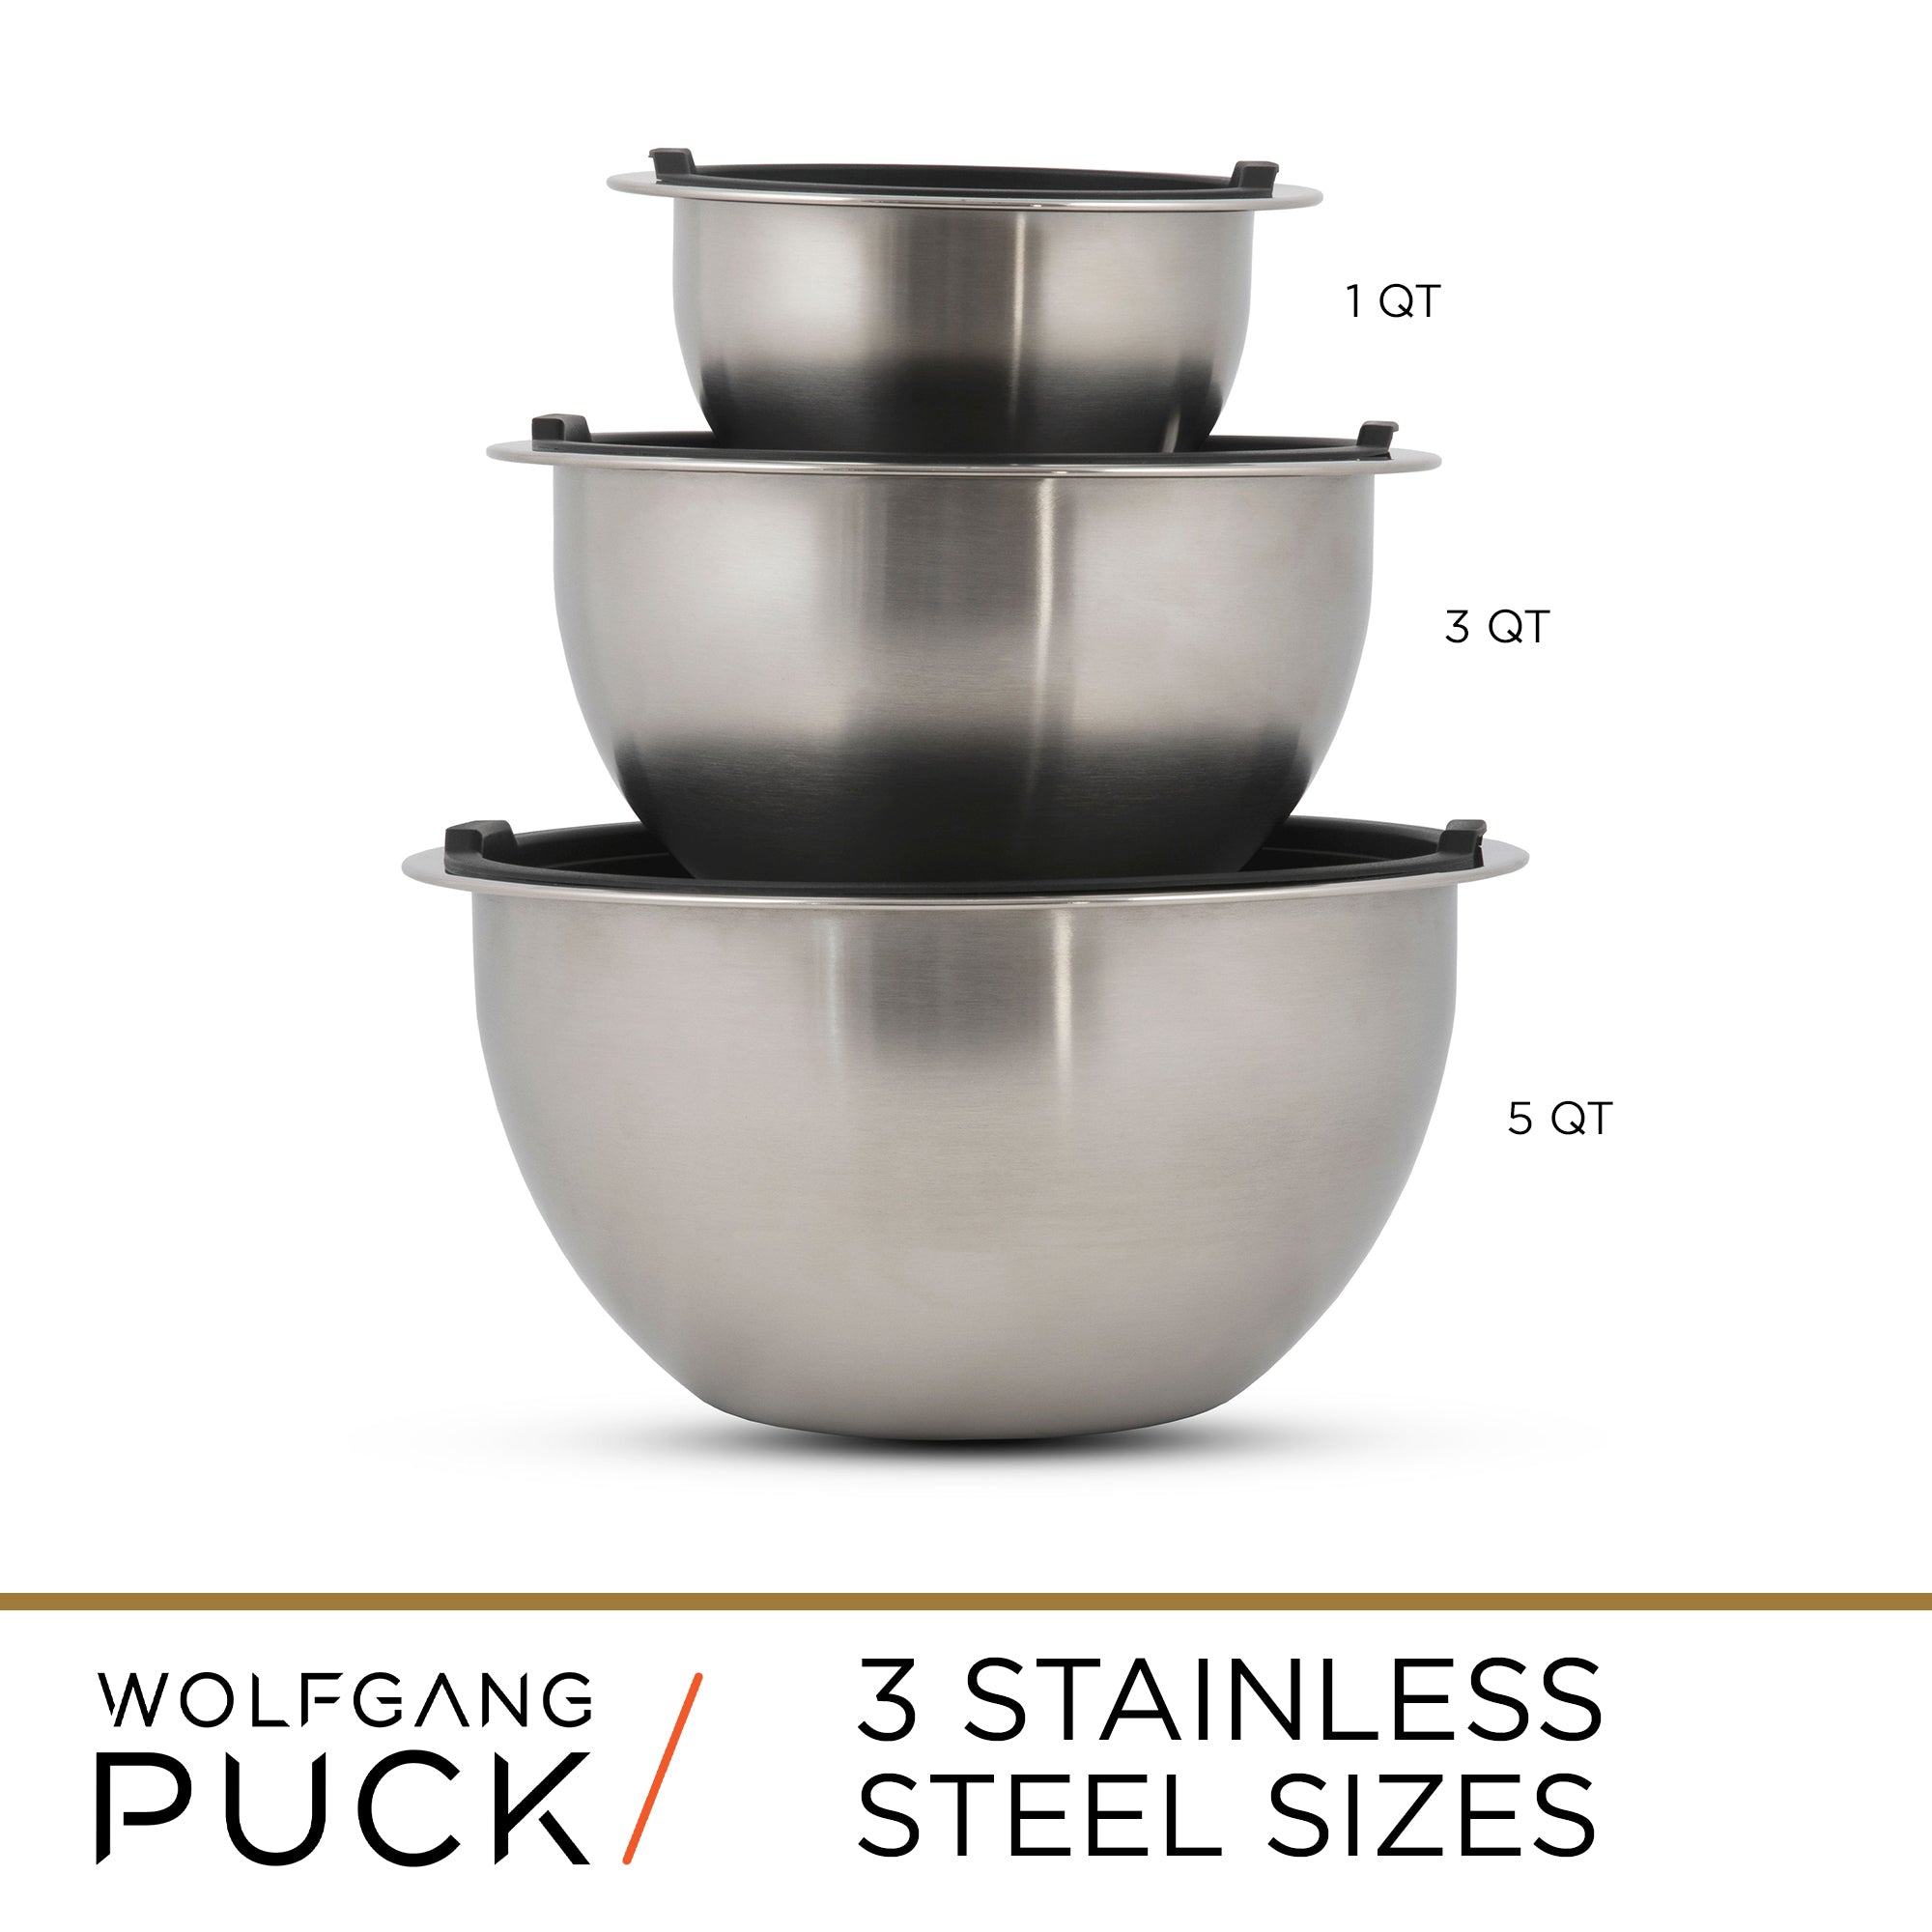 3 stainless steel bowl sizes